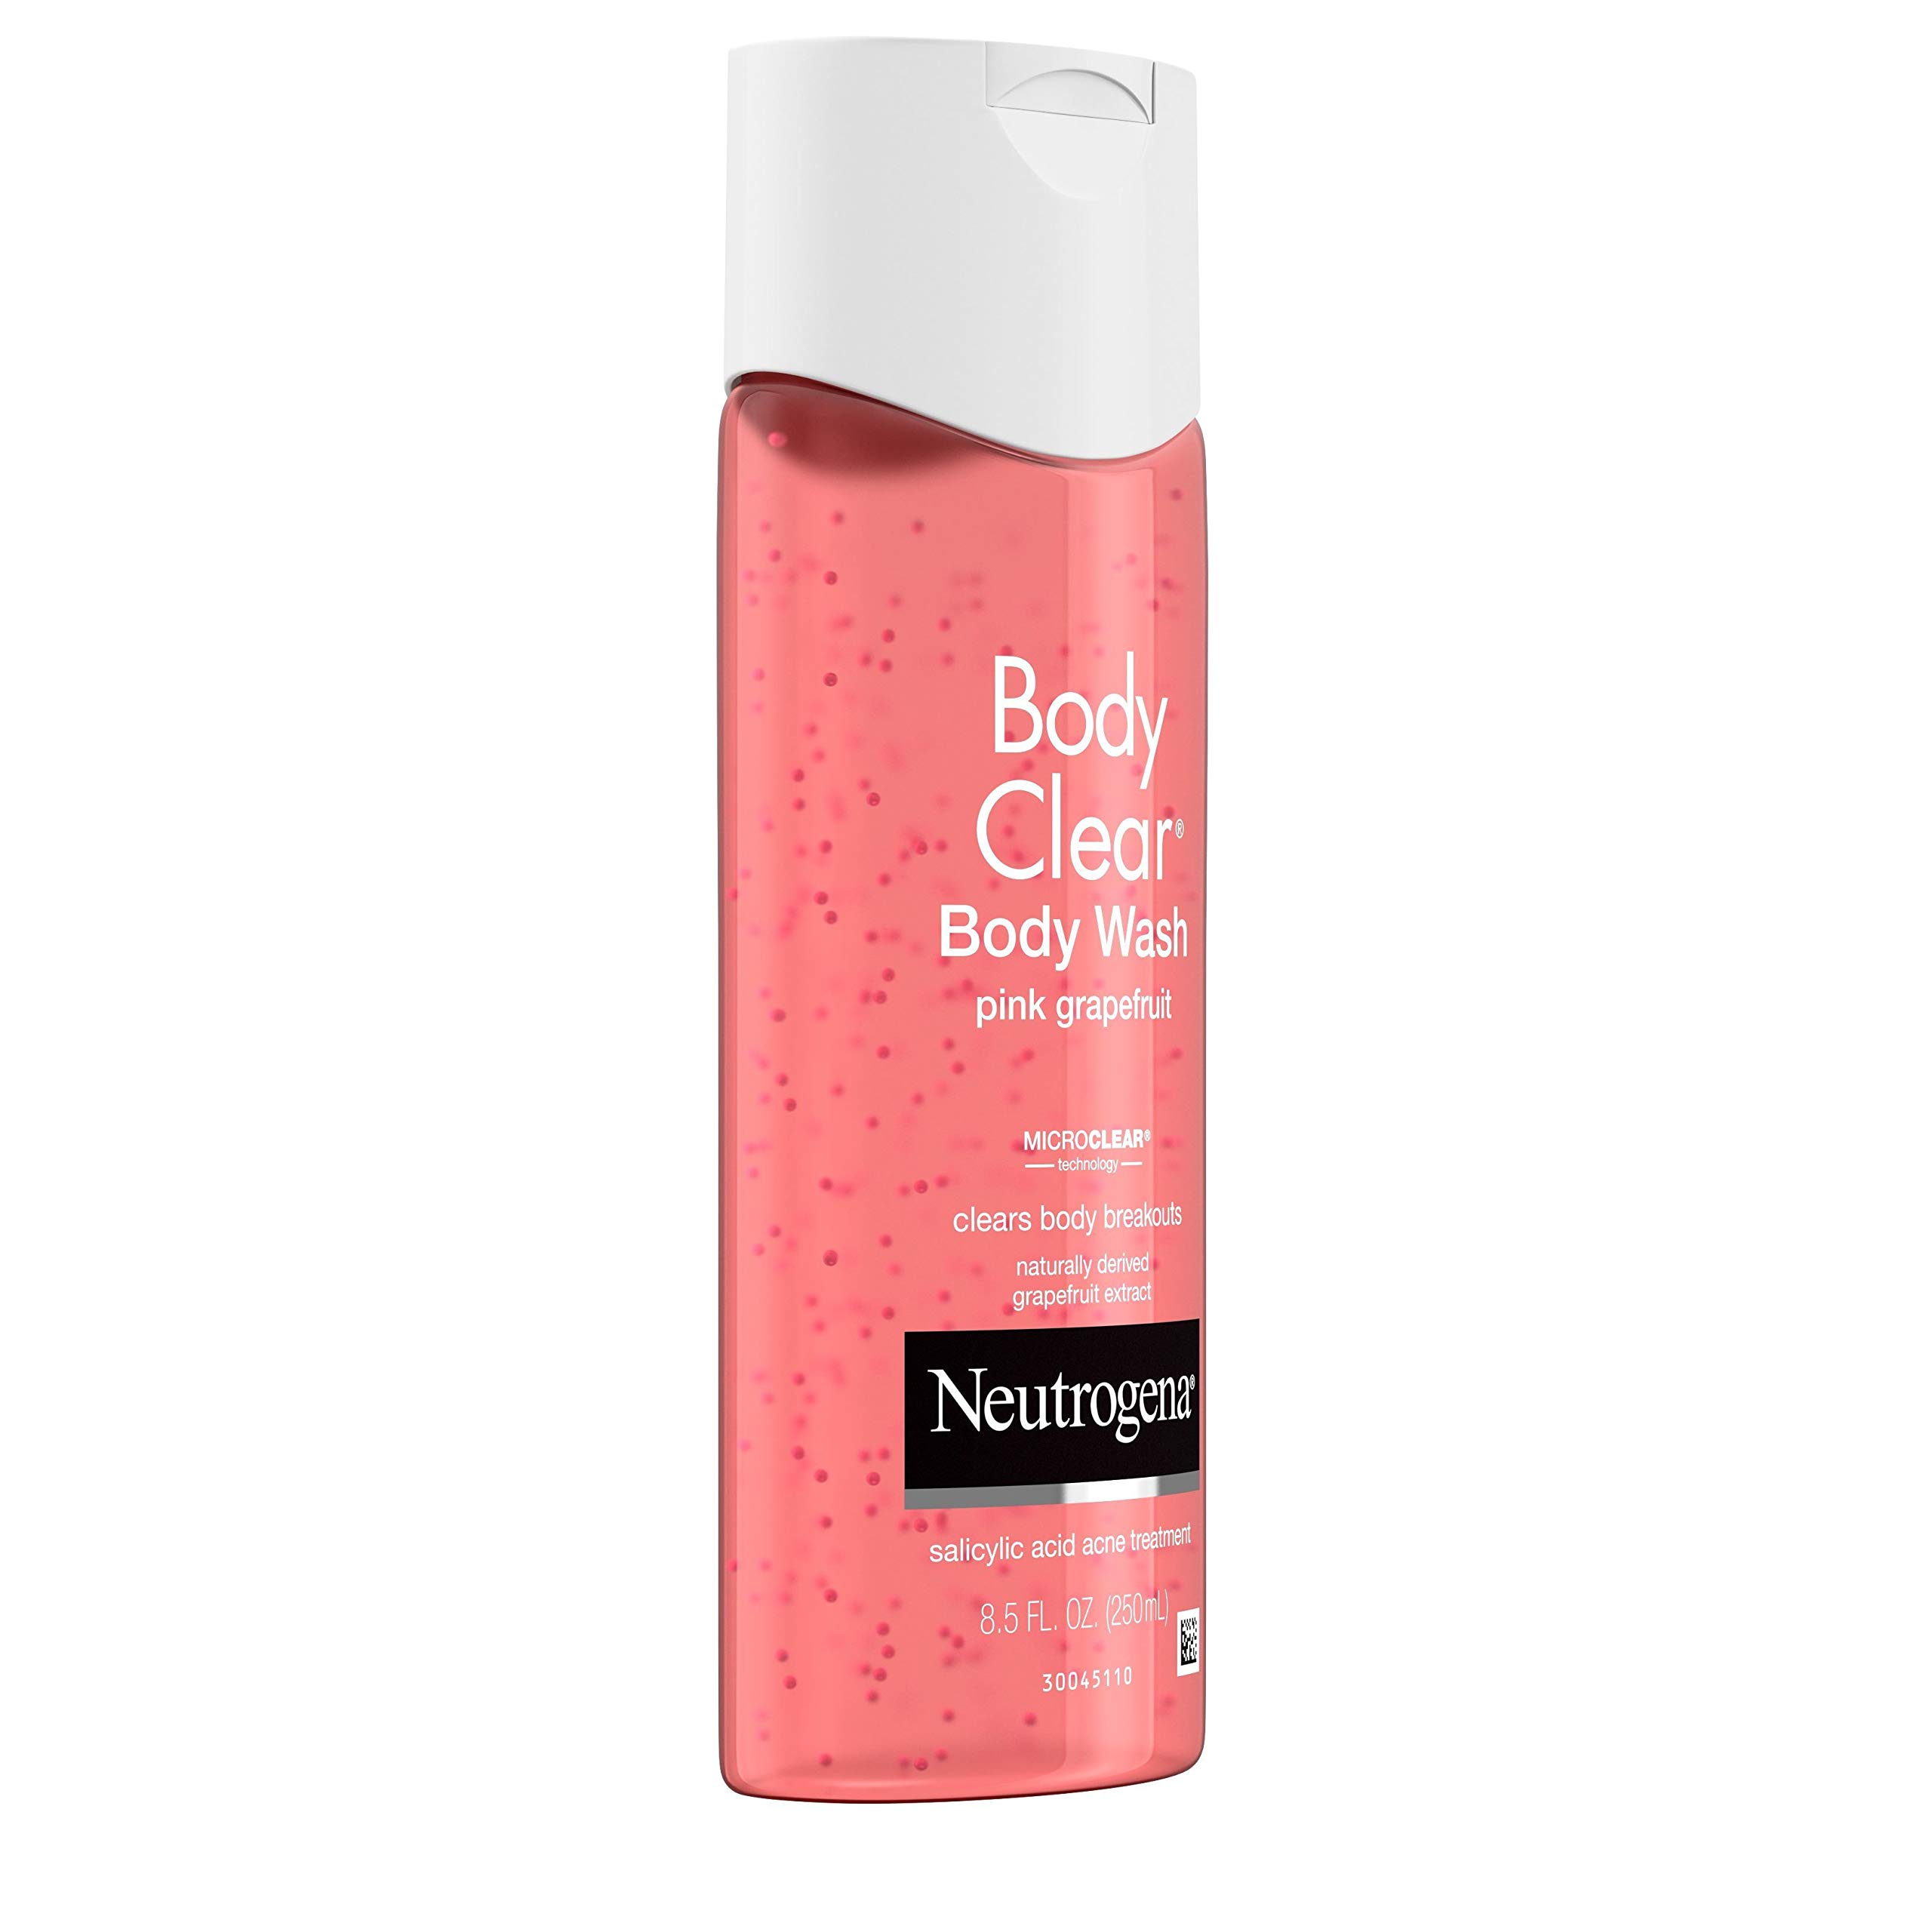 Neutrogena Body Clear Acne Treatment Body Wash with Salicylic Acid Acne Medicine, Pink Grapefruit Body Acne Cleanser to Prevent Breakouts on Back, Chest & Shoulders, 3 x 8.5 fl. oz